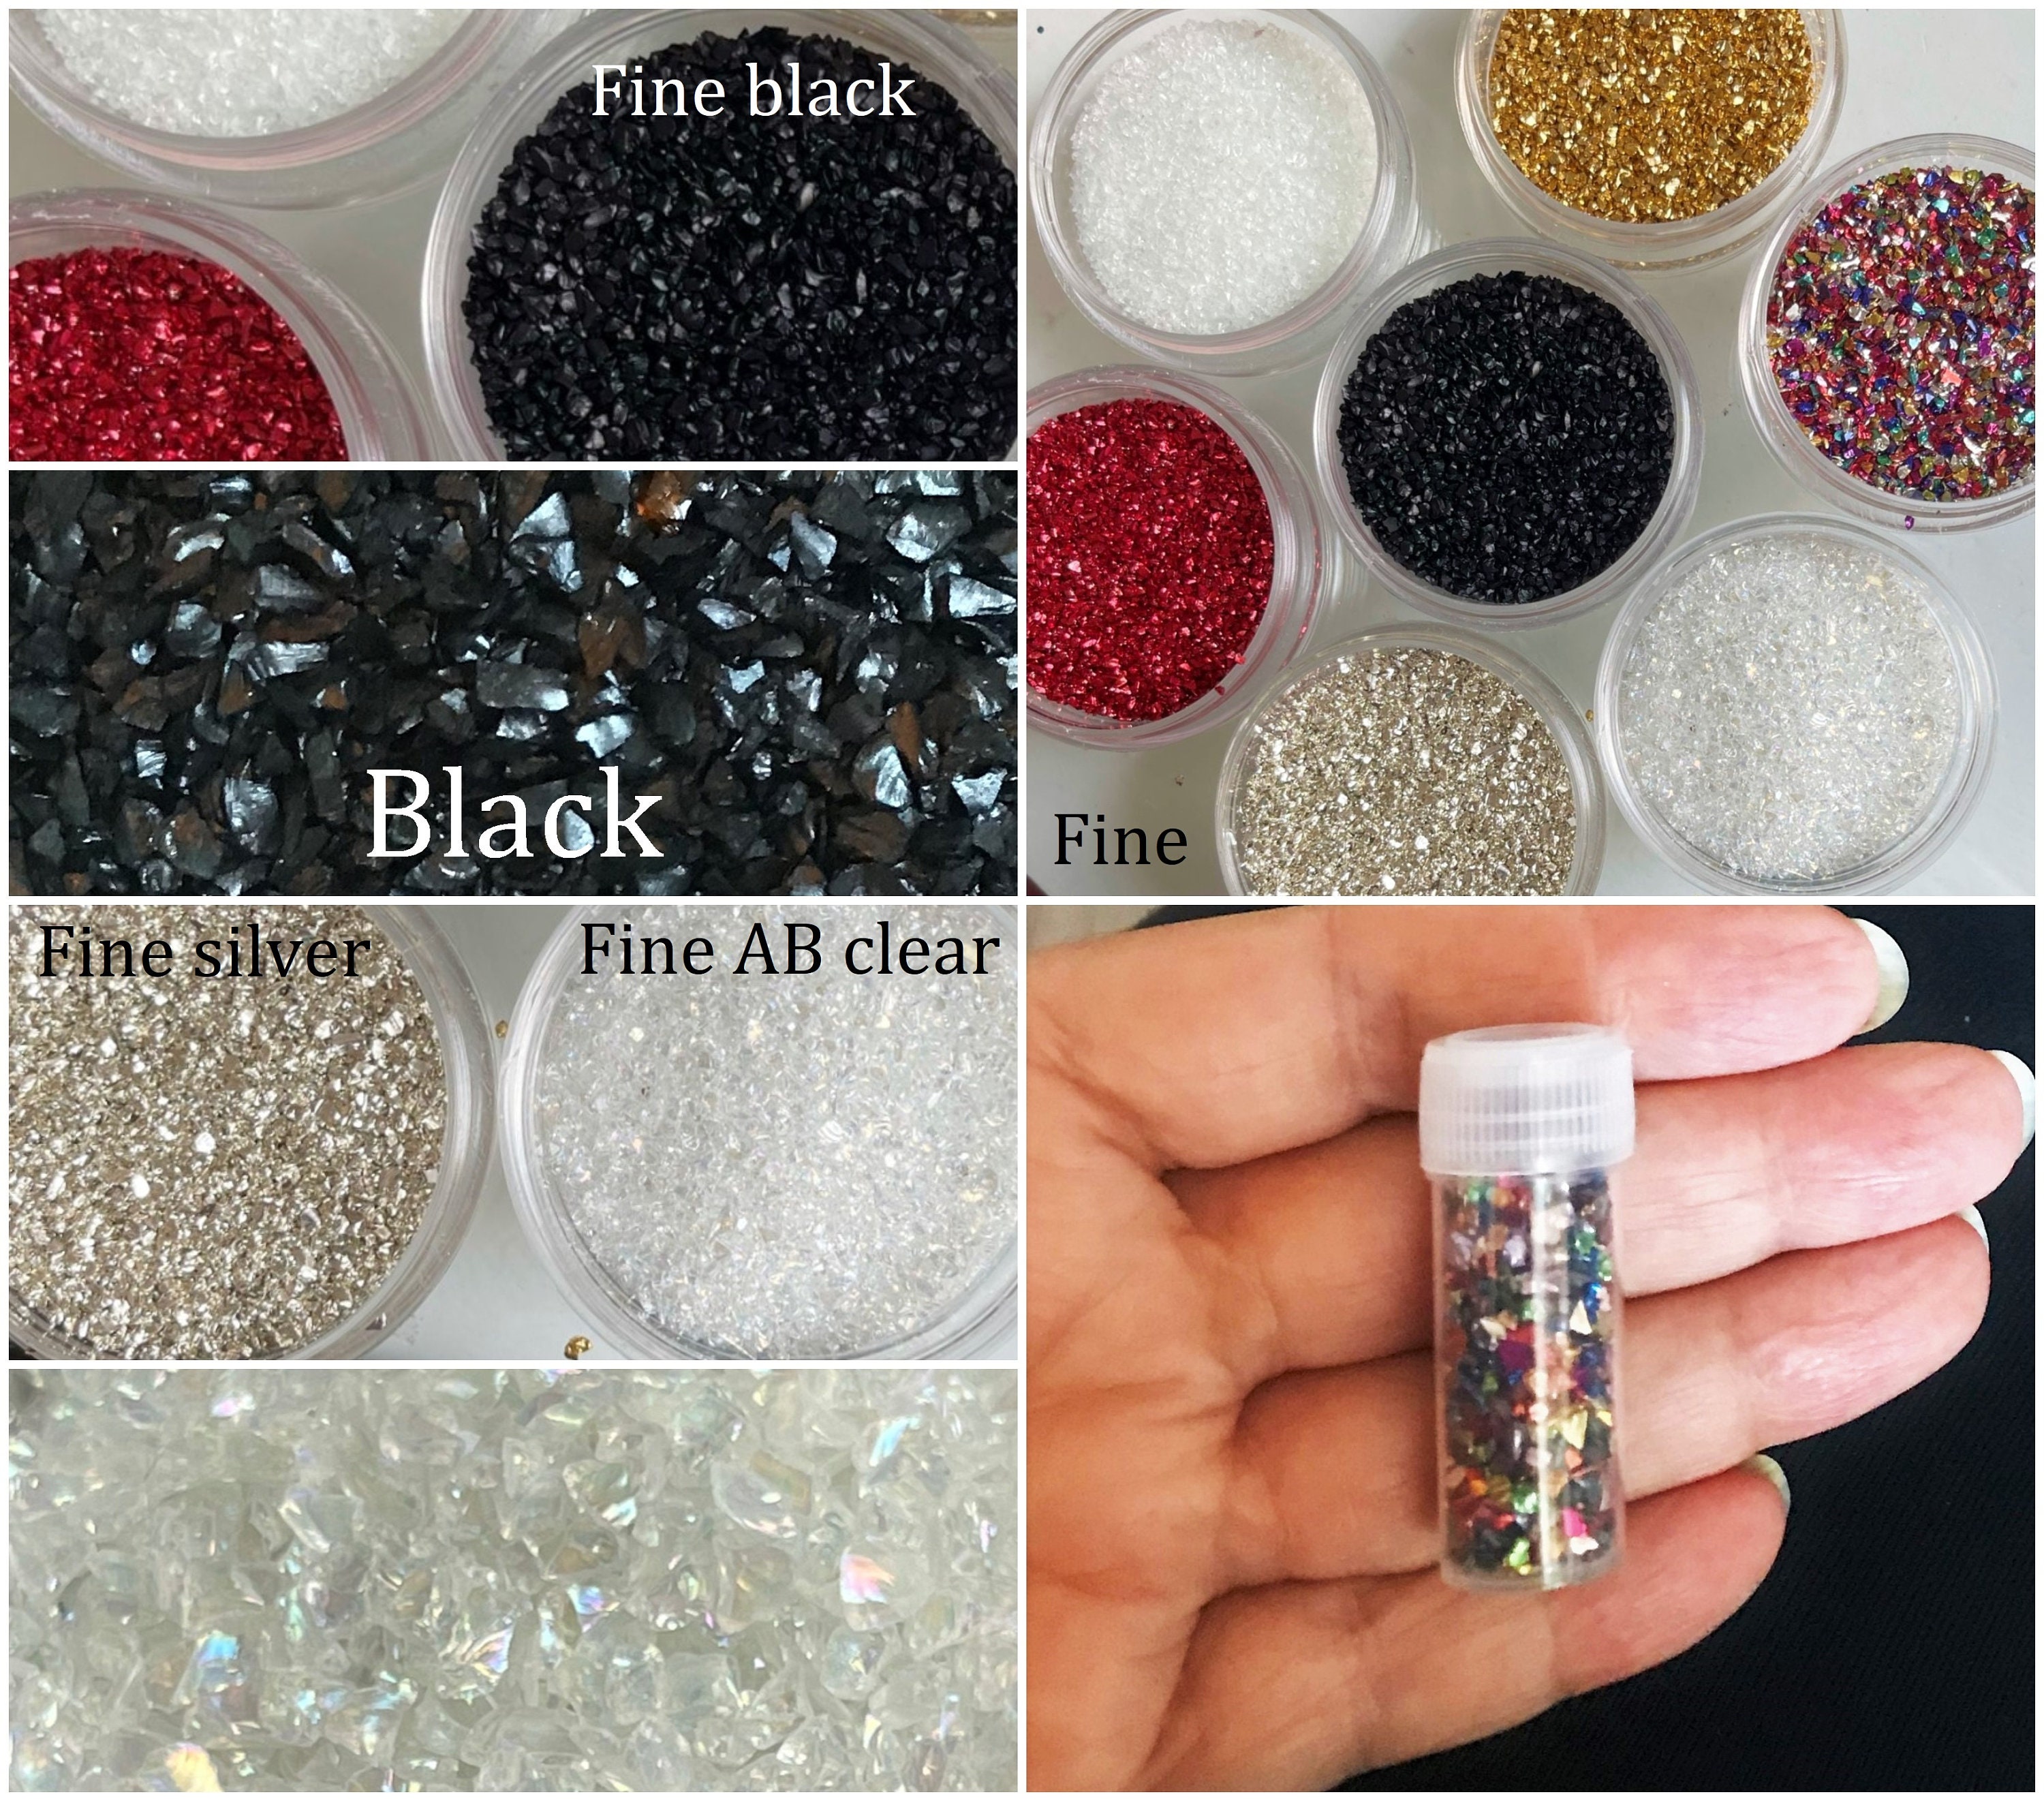 Visland Glitter Crushed Glass for Resin Art, Small Broken Glass Pieces  Irregular Crystal Chunky Flakes Sequins for Nail Arts DIY Vase Filler Epoxy  Jewelry Making Decoration 